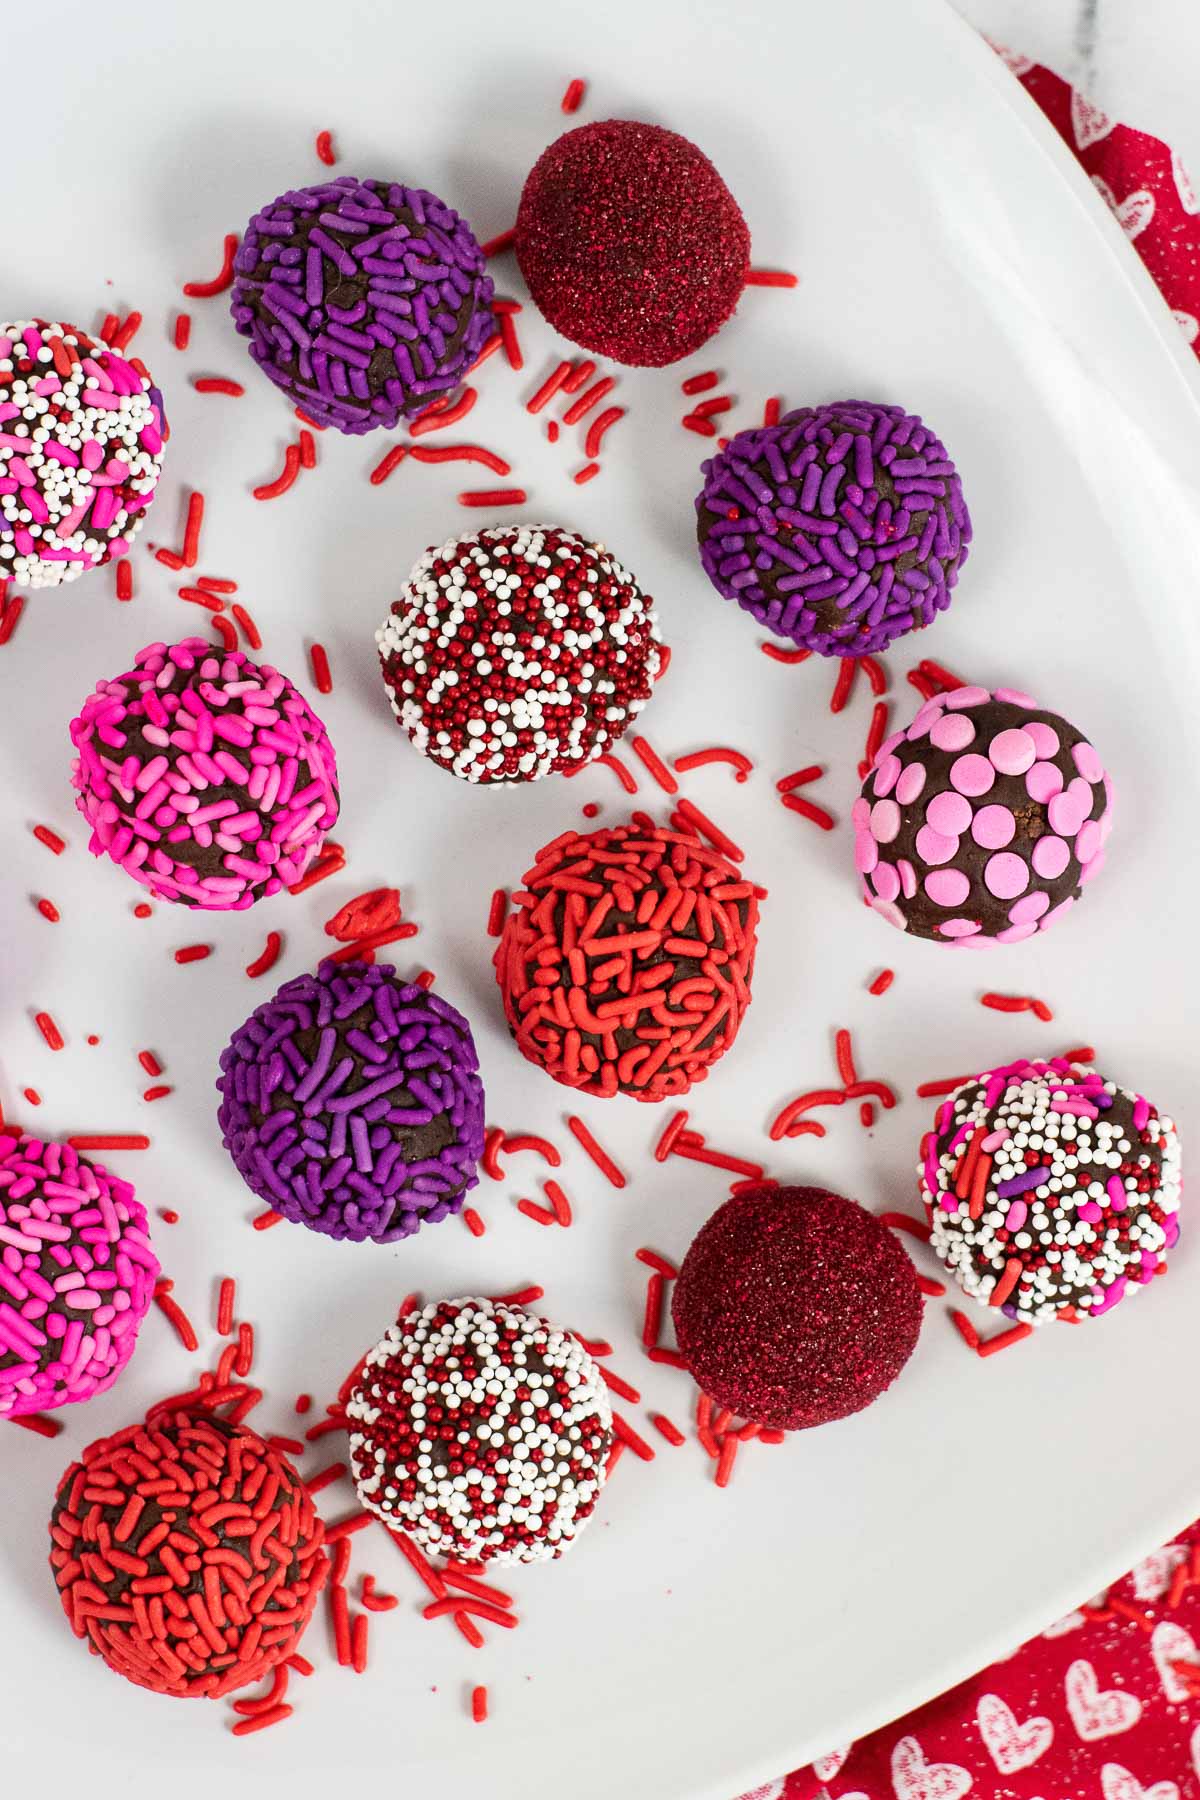 white plate with 14 brownie truffle balls covered in different colored sprinkles - red, purple, red, white 